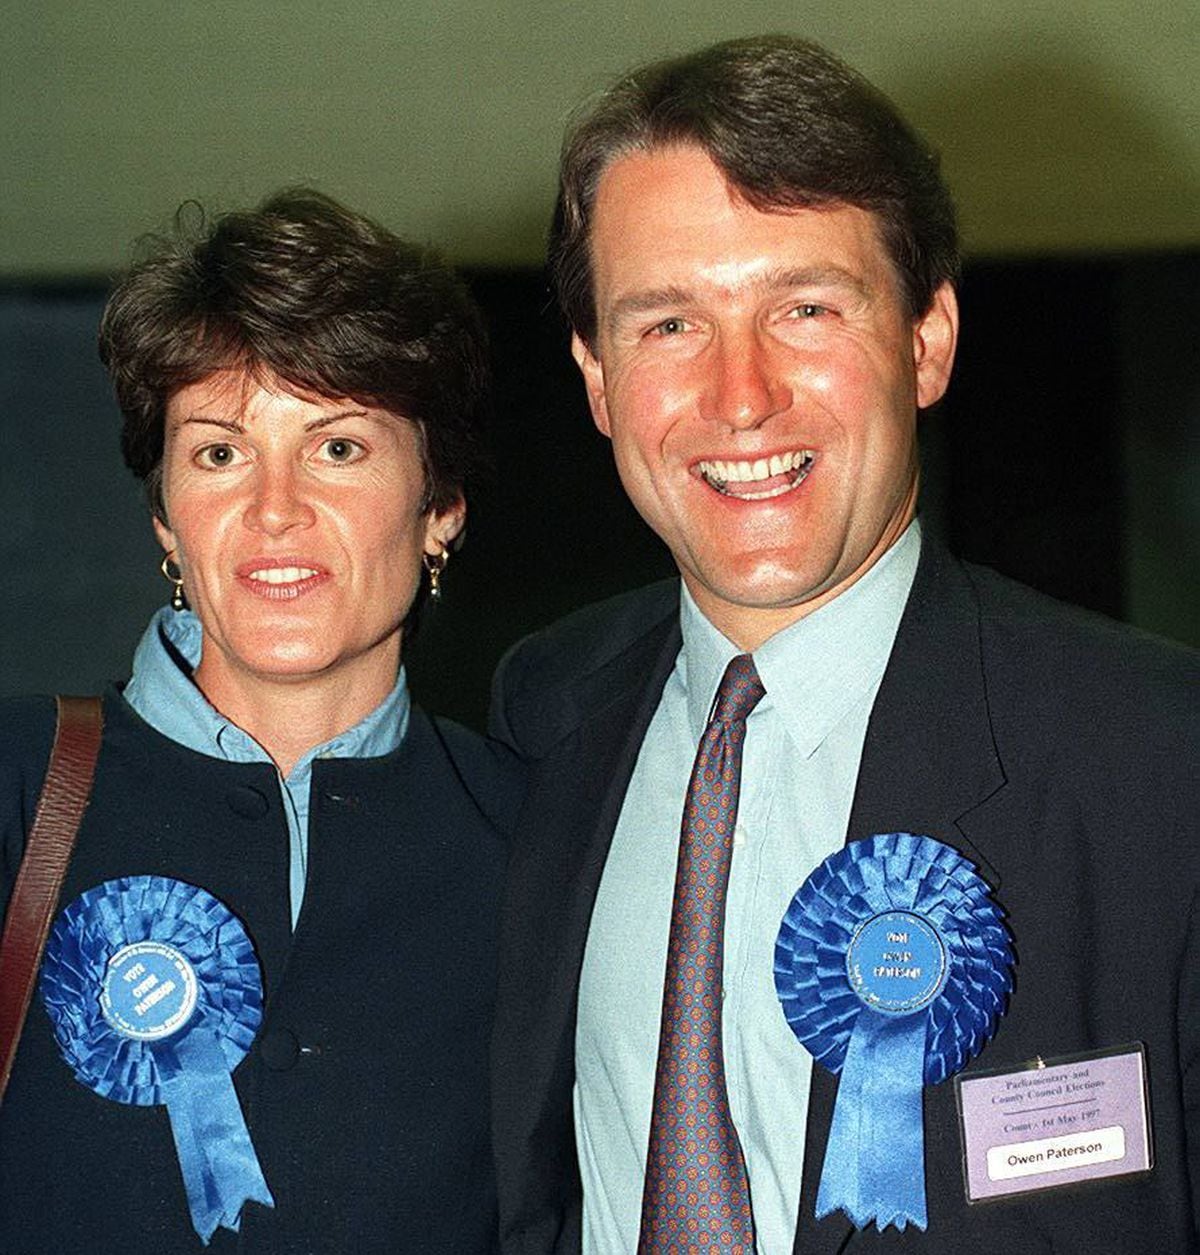 Owen Paterson was first elected as MP for North Shropshire in 1997